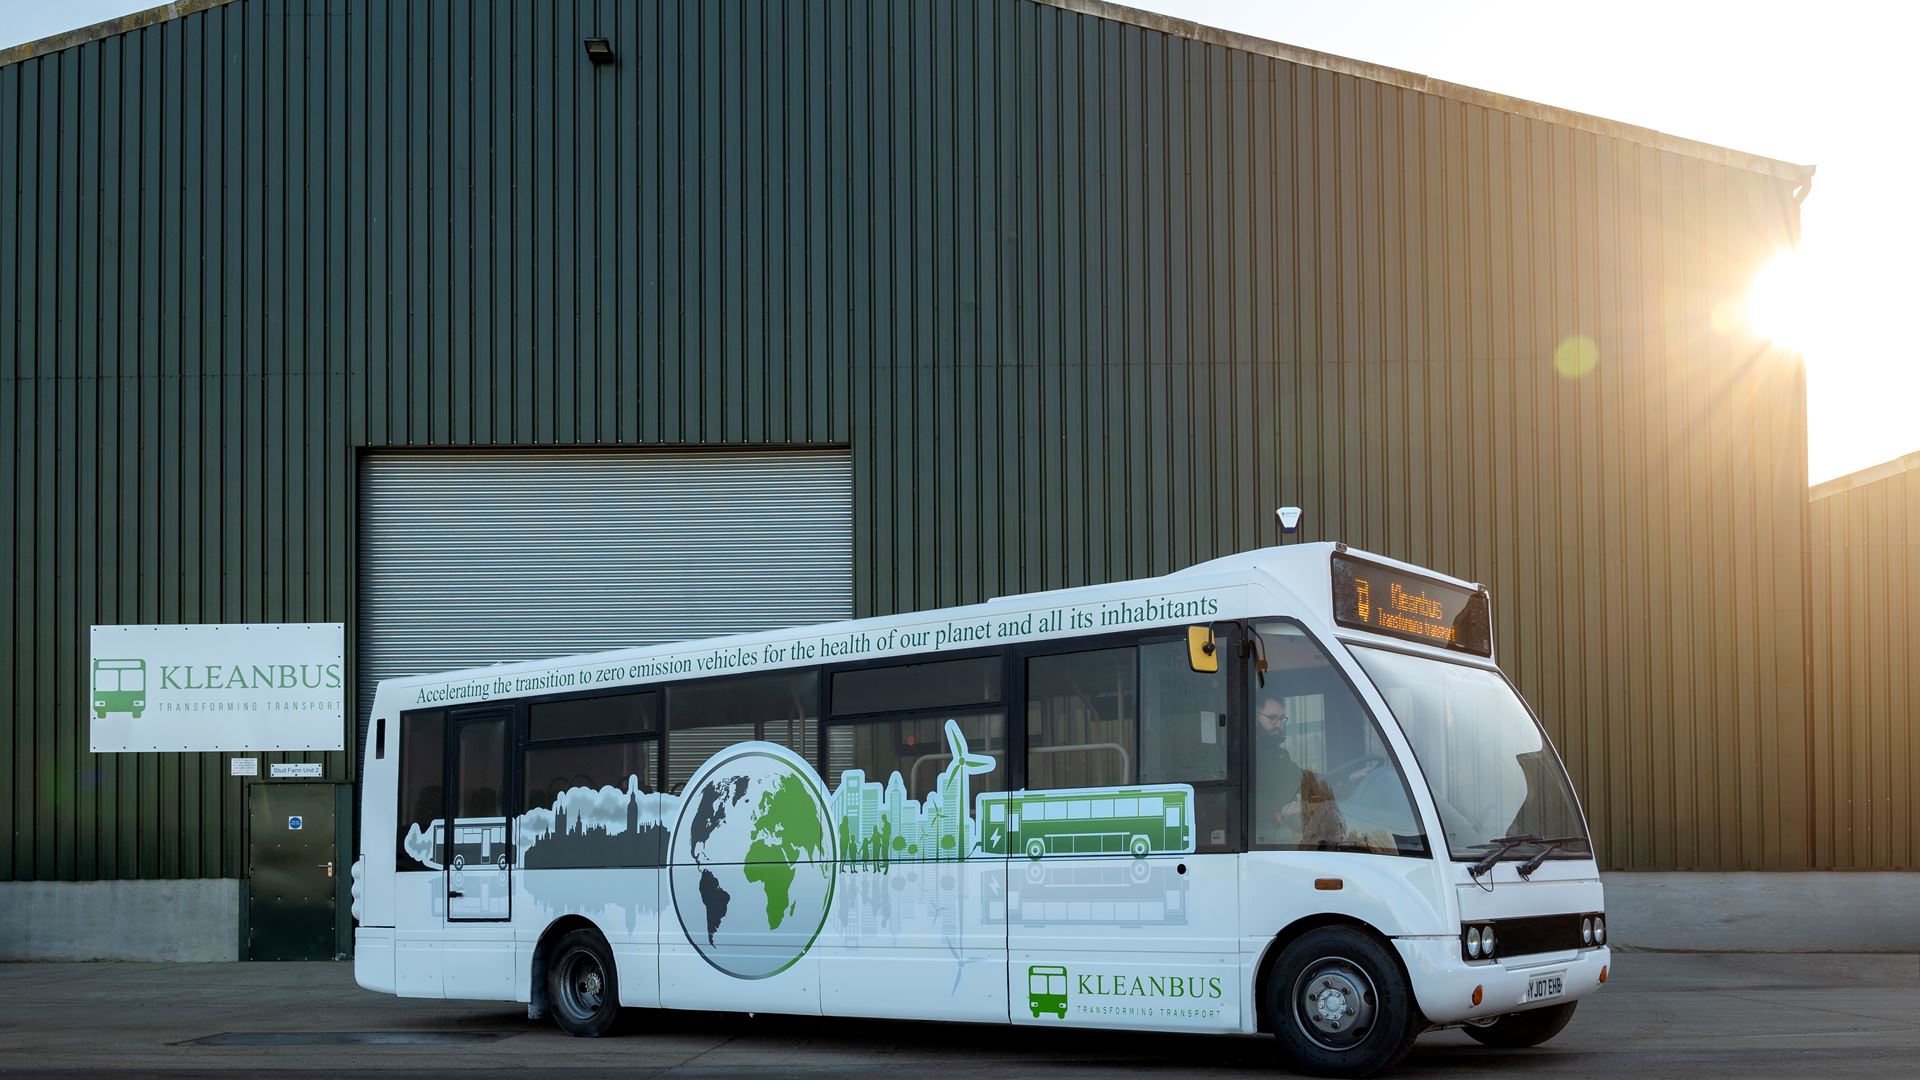 The UK's Kleanbus Completes Build of its First Repowered bus